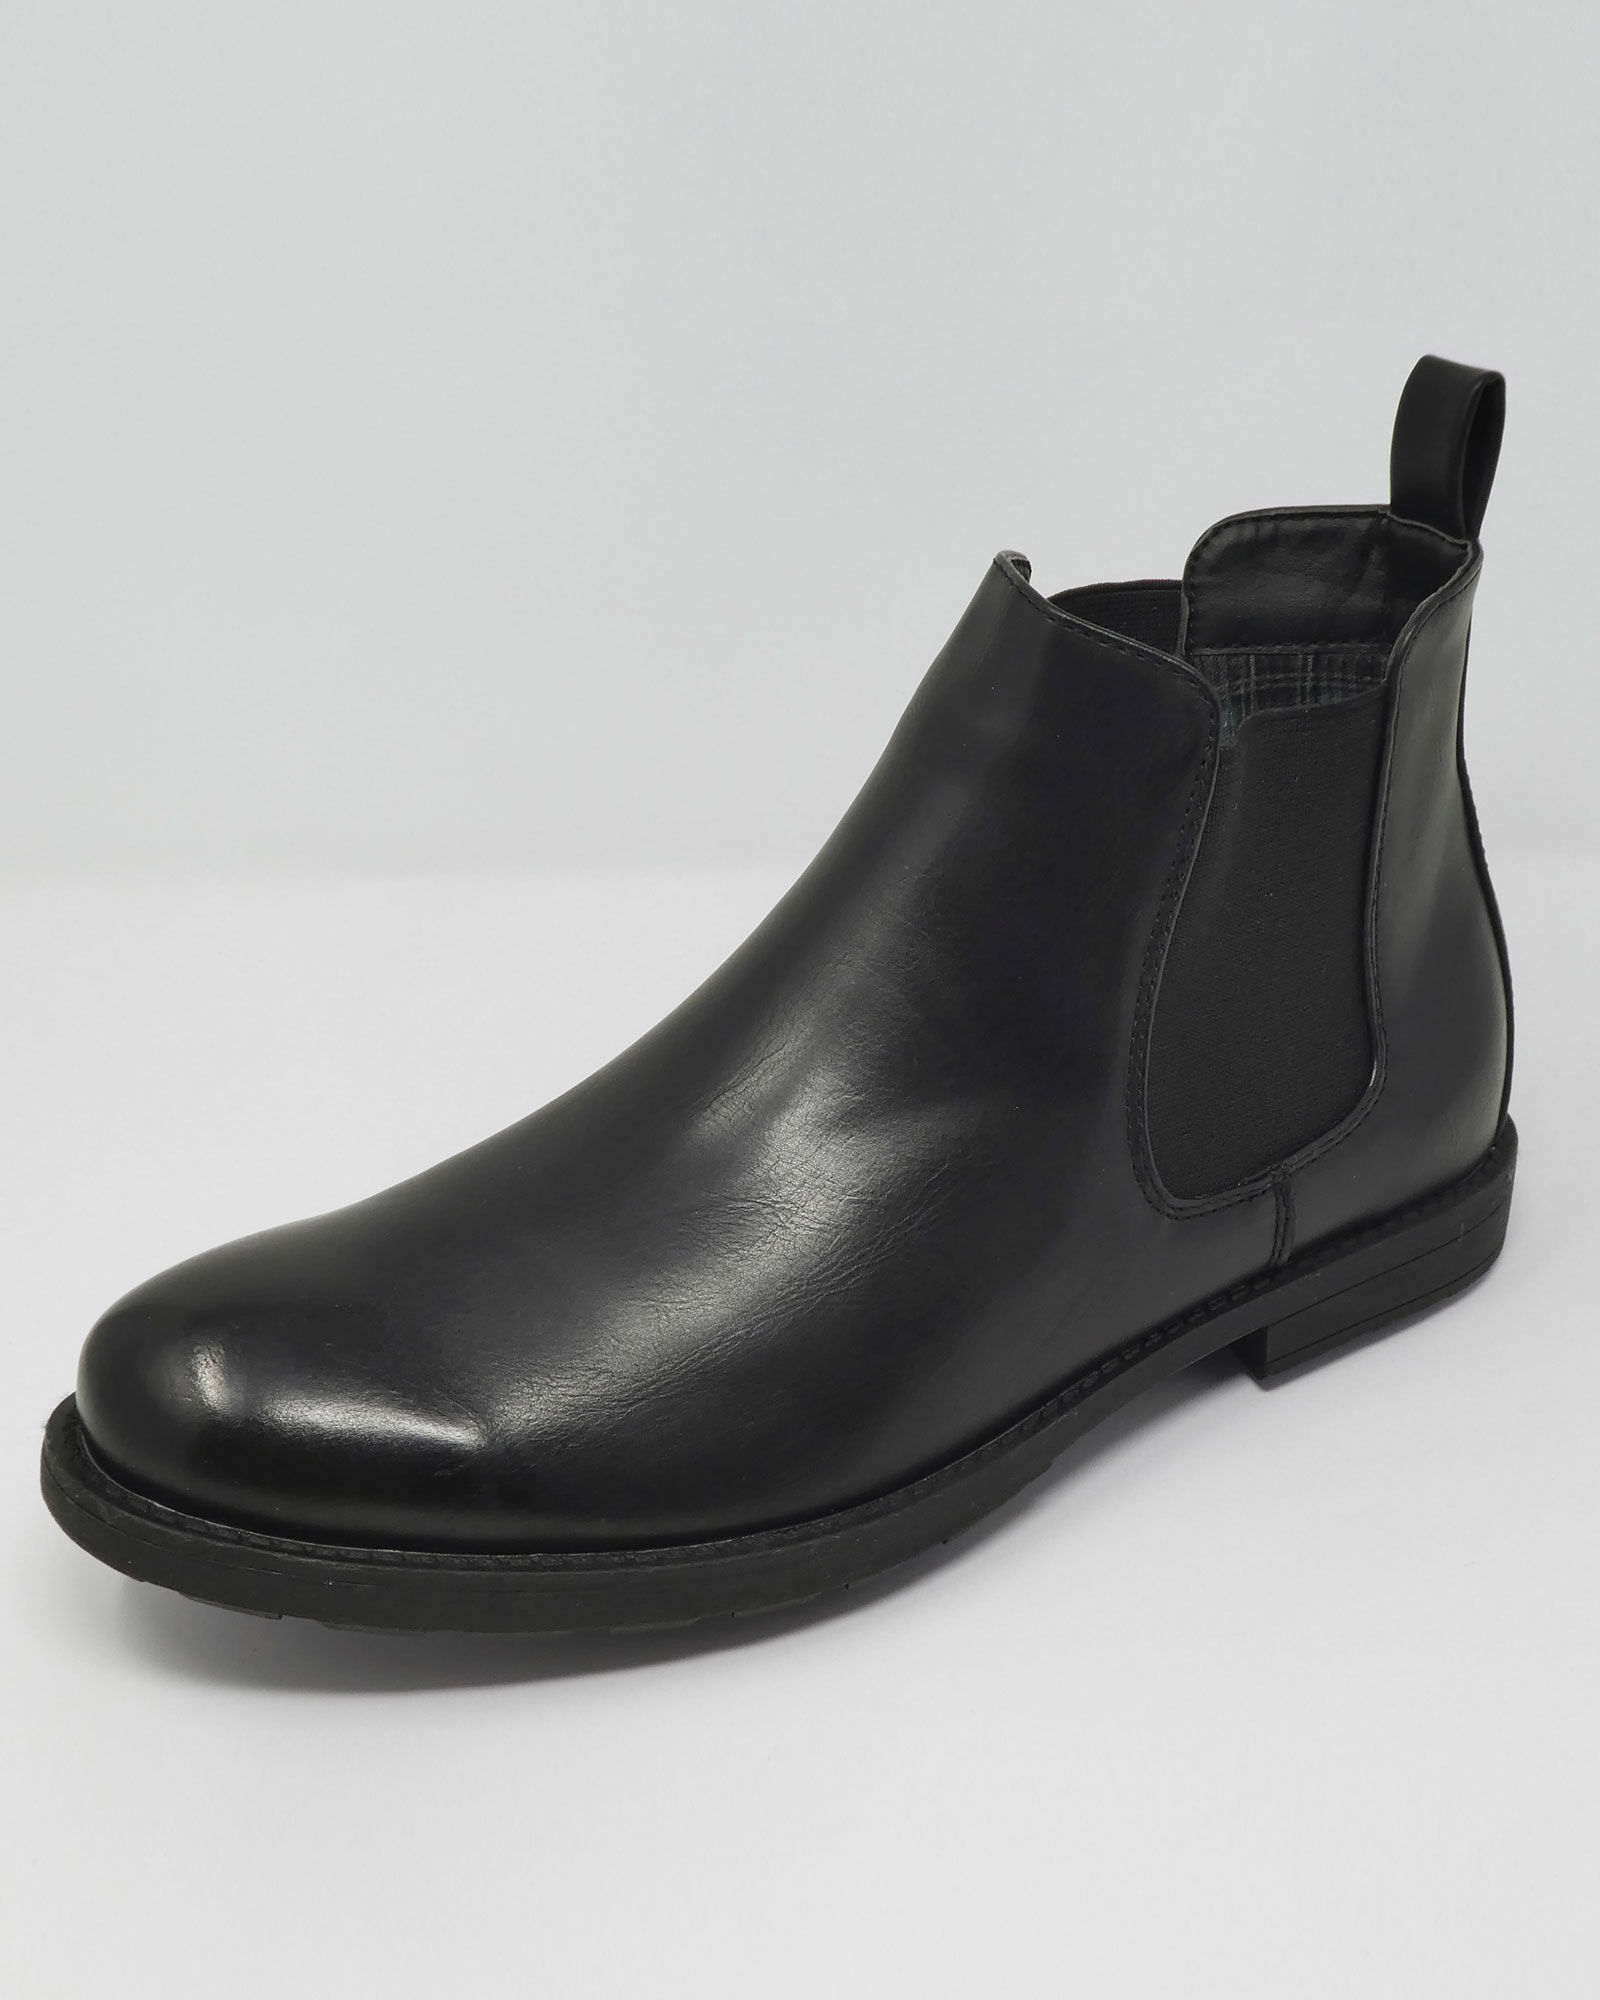 cotton traders sale boots